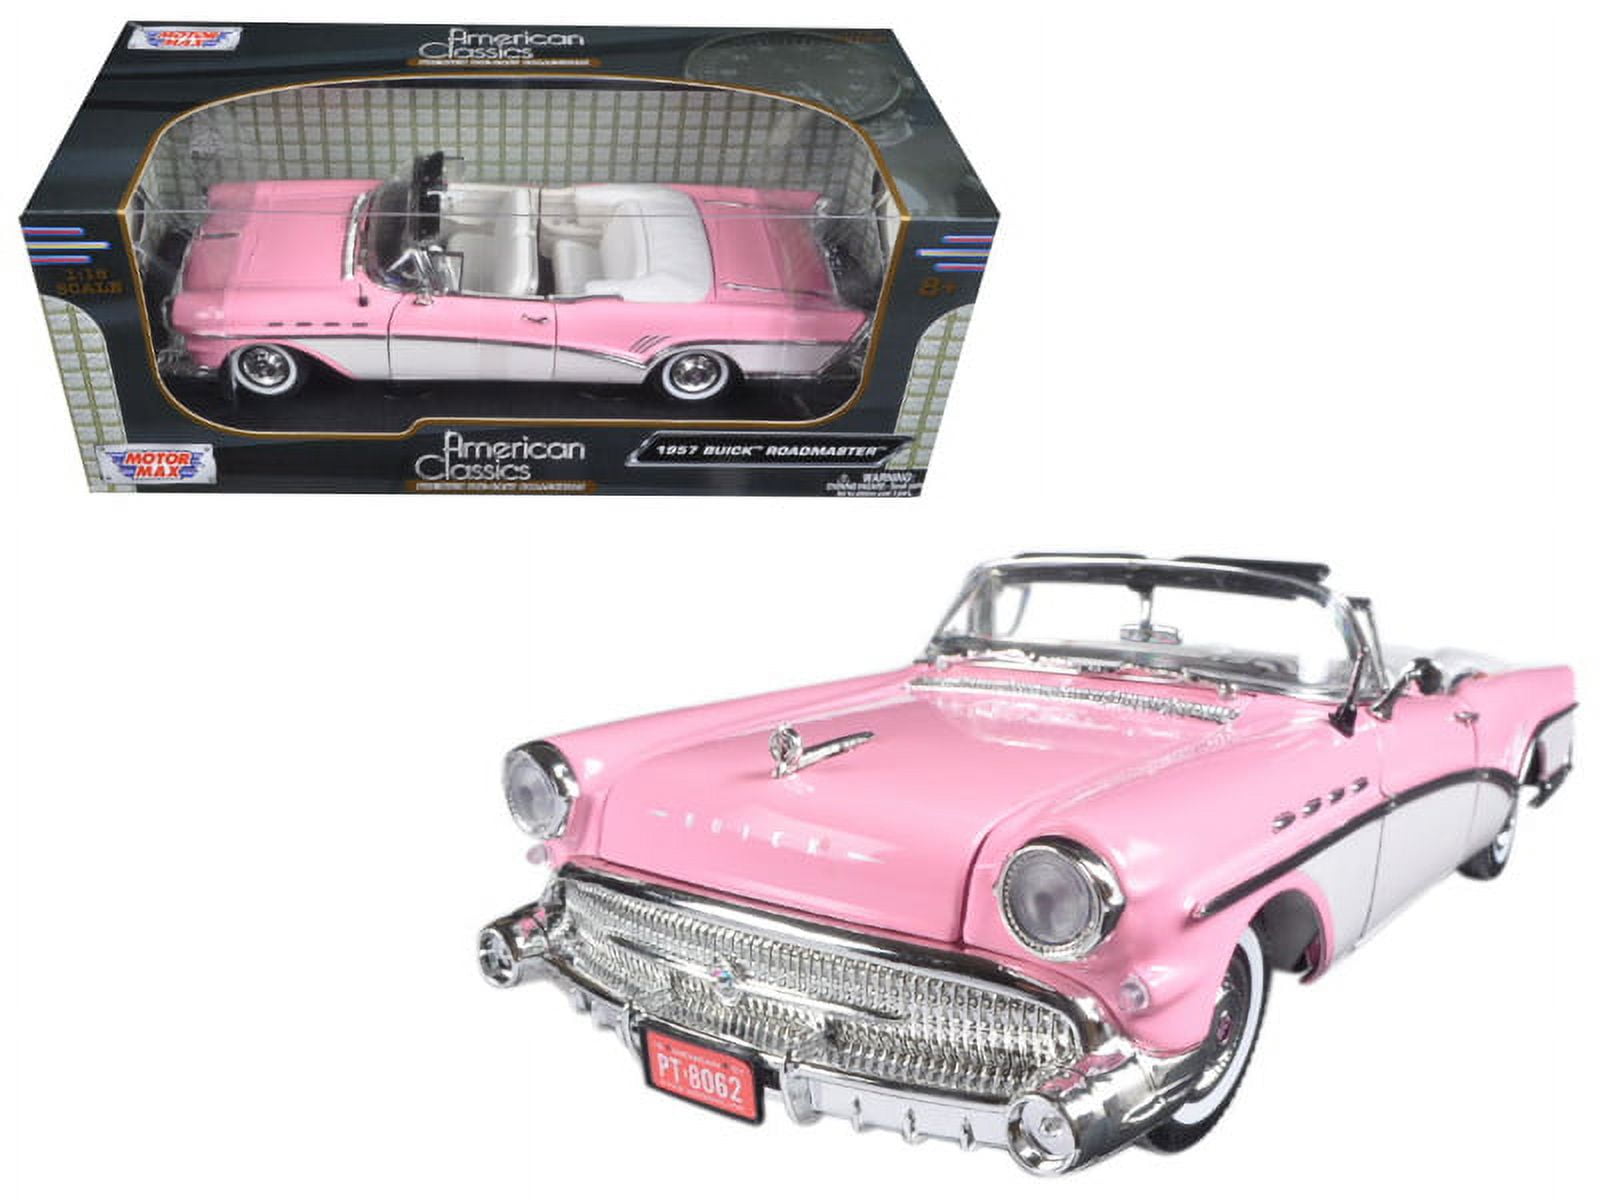 73152ac-pnk 1957 Buick Roadmaster 1 By 18 Diecast Model Car - Pink